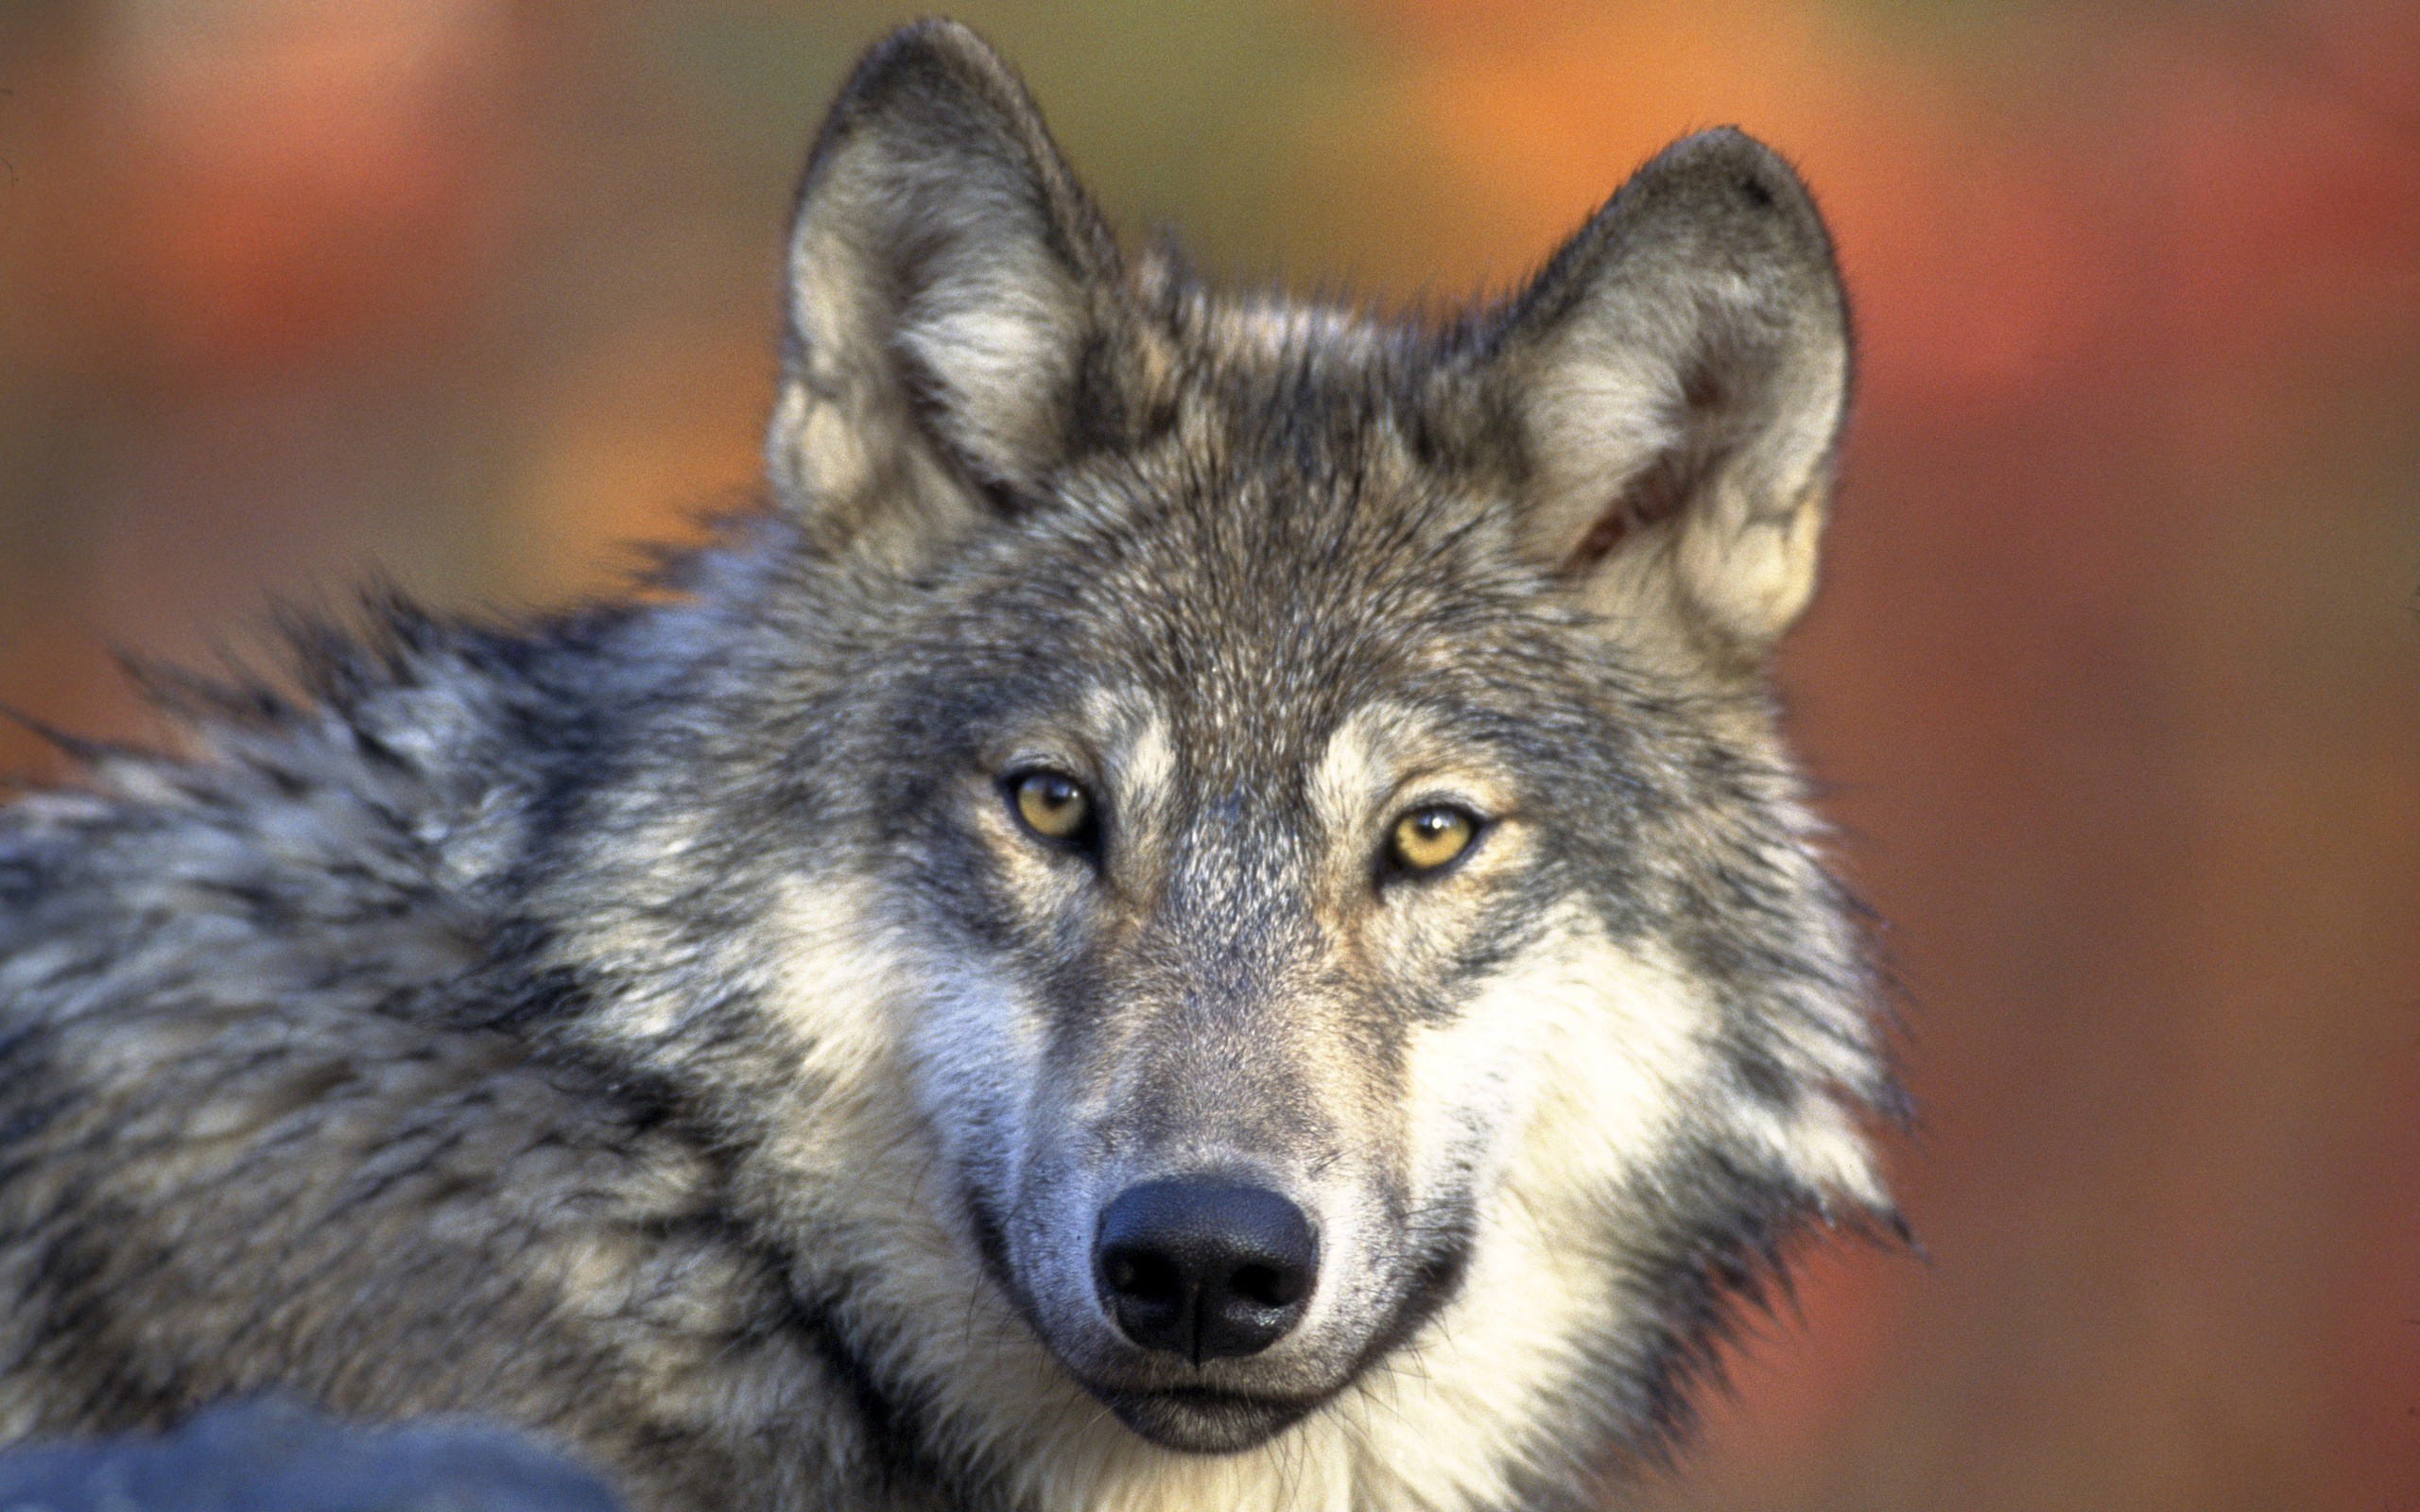 2560x1600 cool wallpapers of wolves 1564 wallpapers cool wallpapers of wolves .